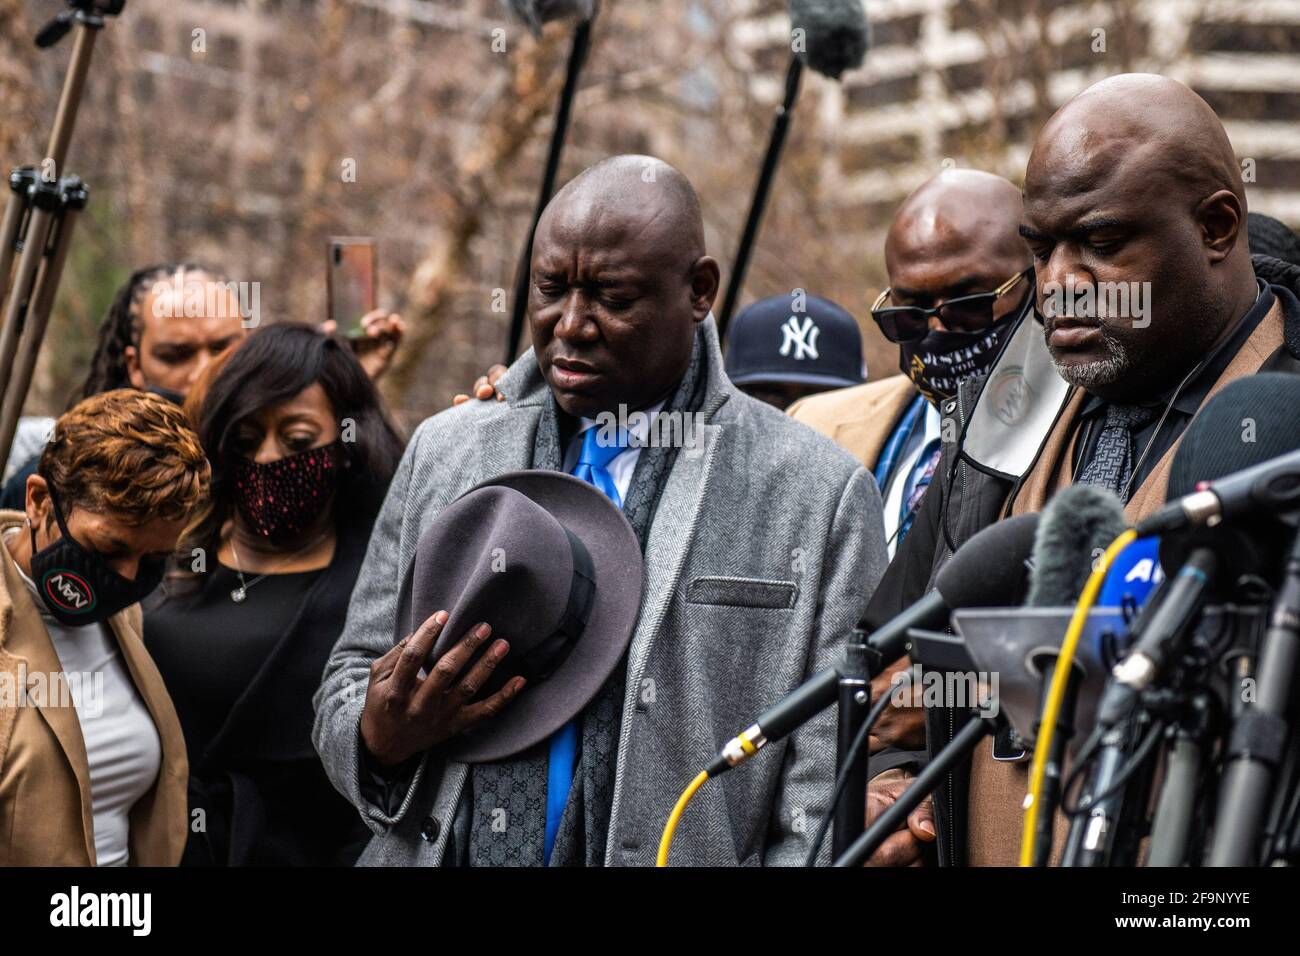 Rachel Noerd, Lawyer Benjamin Crump, Philonise Floyd and Rodney Floyd have a moment of silent prayer during a press conference outside the Hennepin County Government Center on April 19, 2021, the day of closing arguments and the beginning of jury deliberation in the Derek Chauvin Trial in Minneapolis, Minnesota. Photo: Chris Tuite /ImageSPACE/MediaPunch Stock Photo